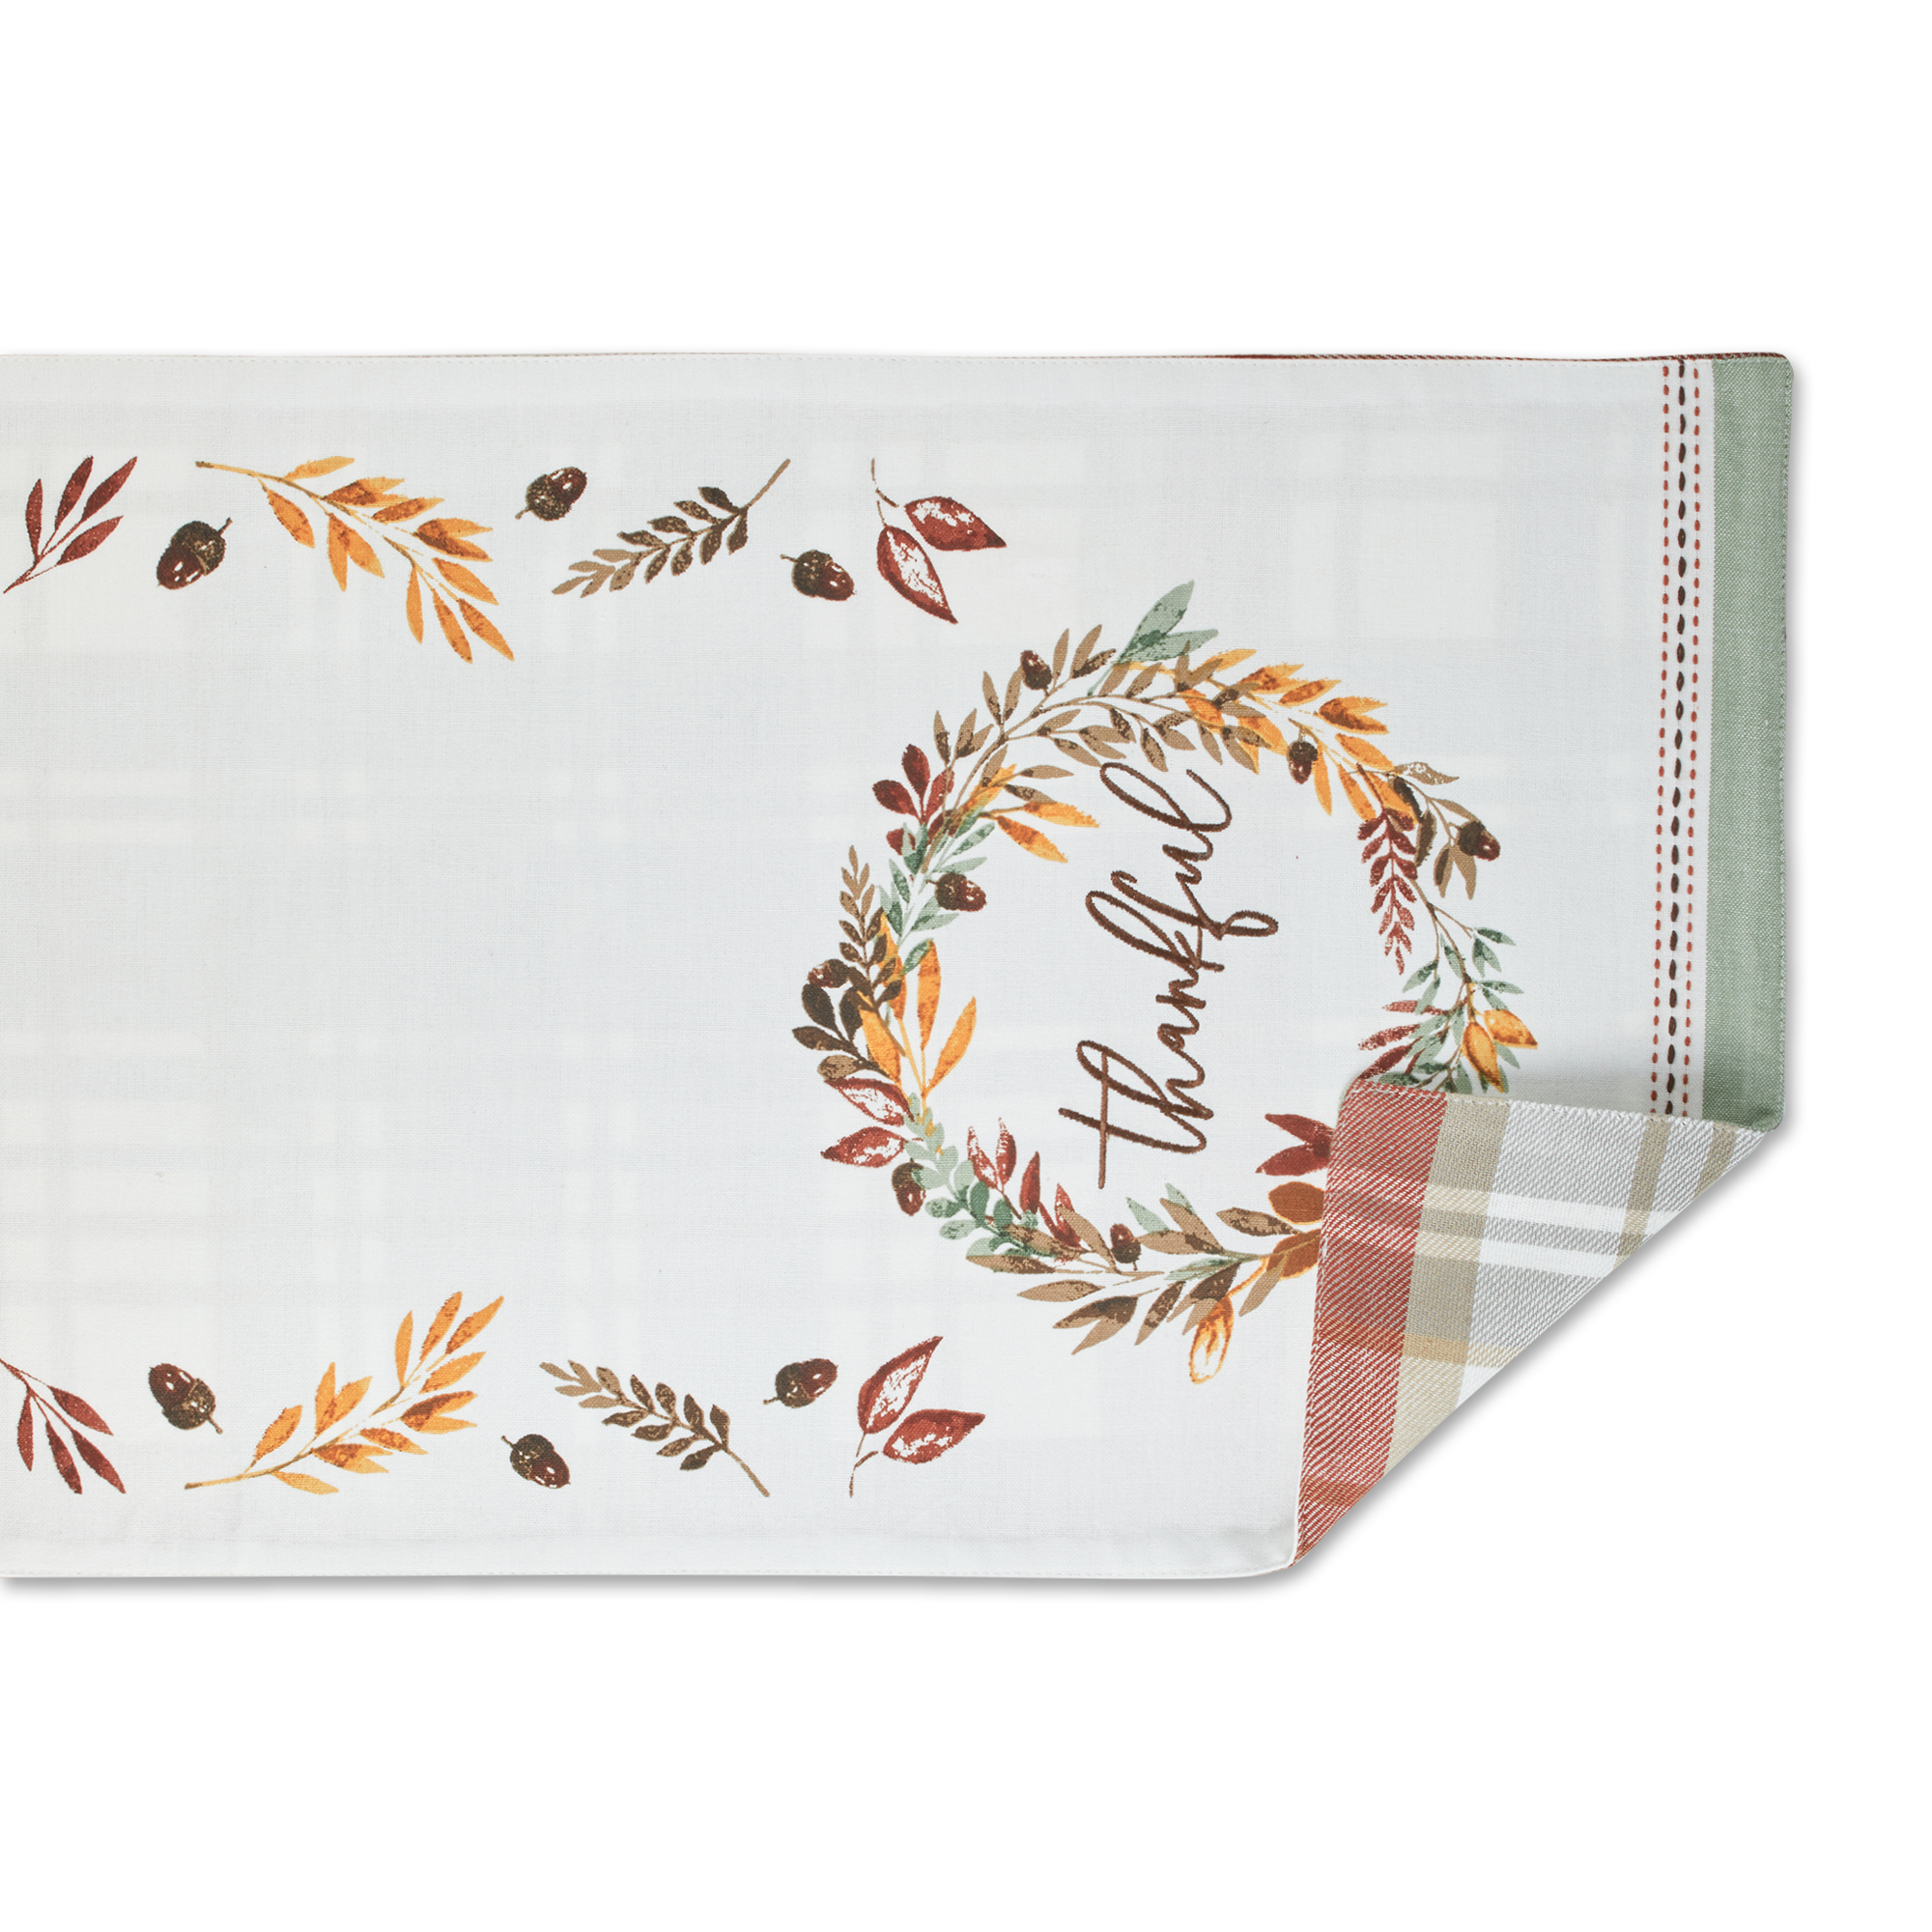 DII Thanksgiving Thankful Autum, Fall Leaves, Reversable Table Runner 14x108"